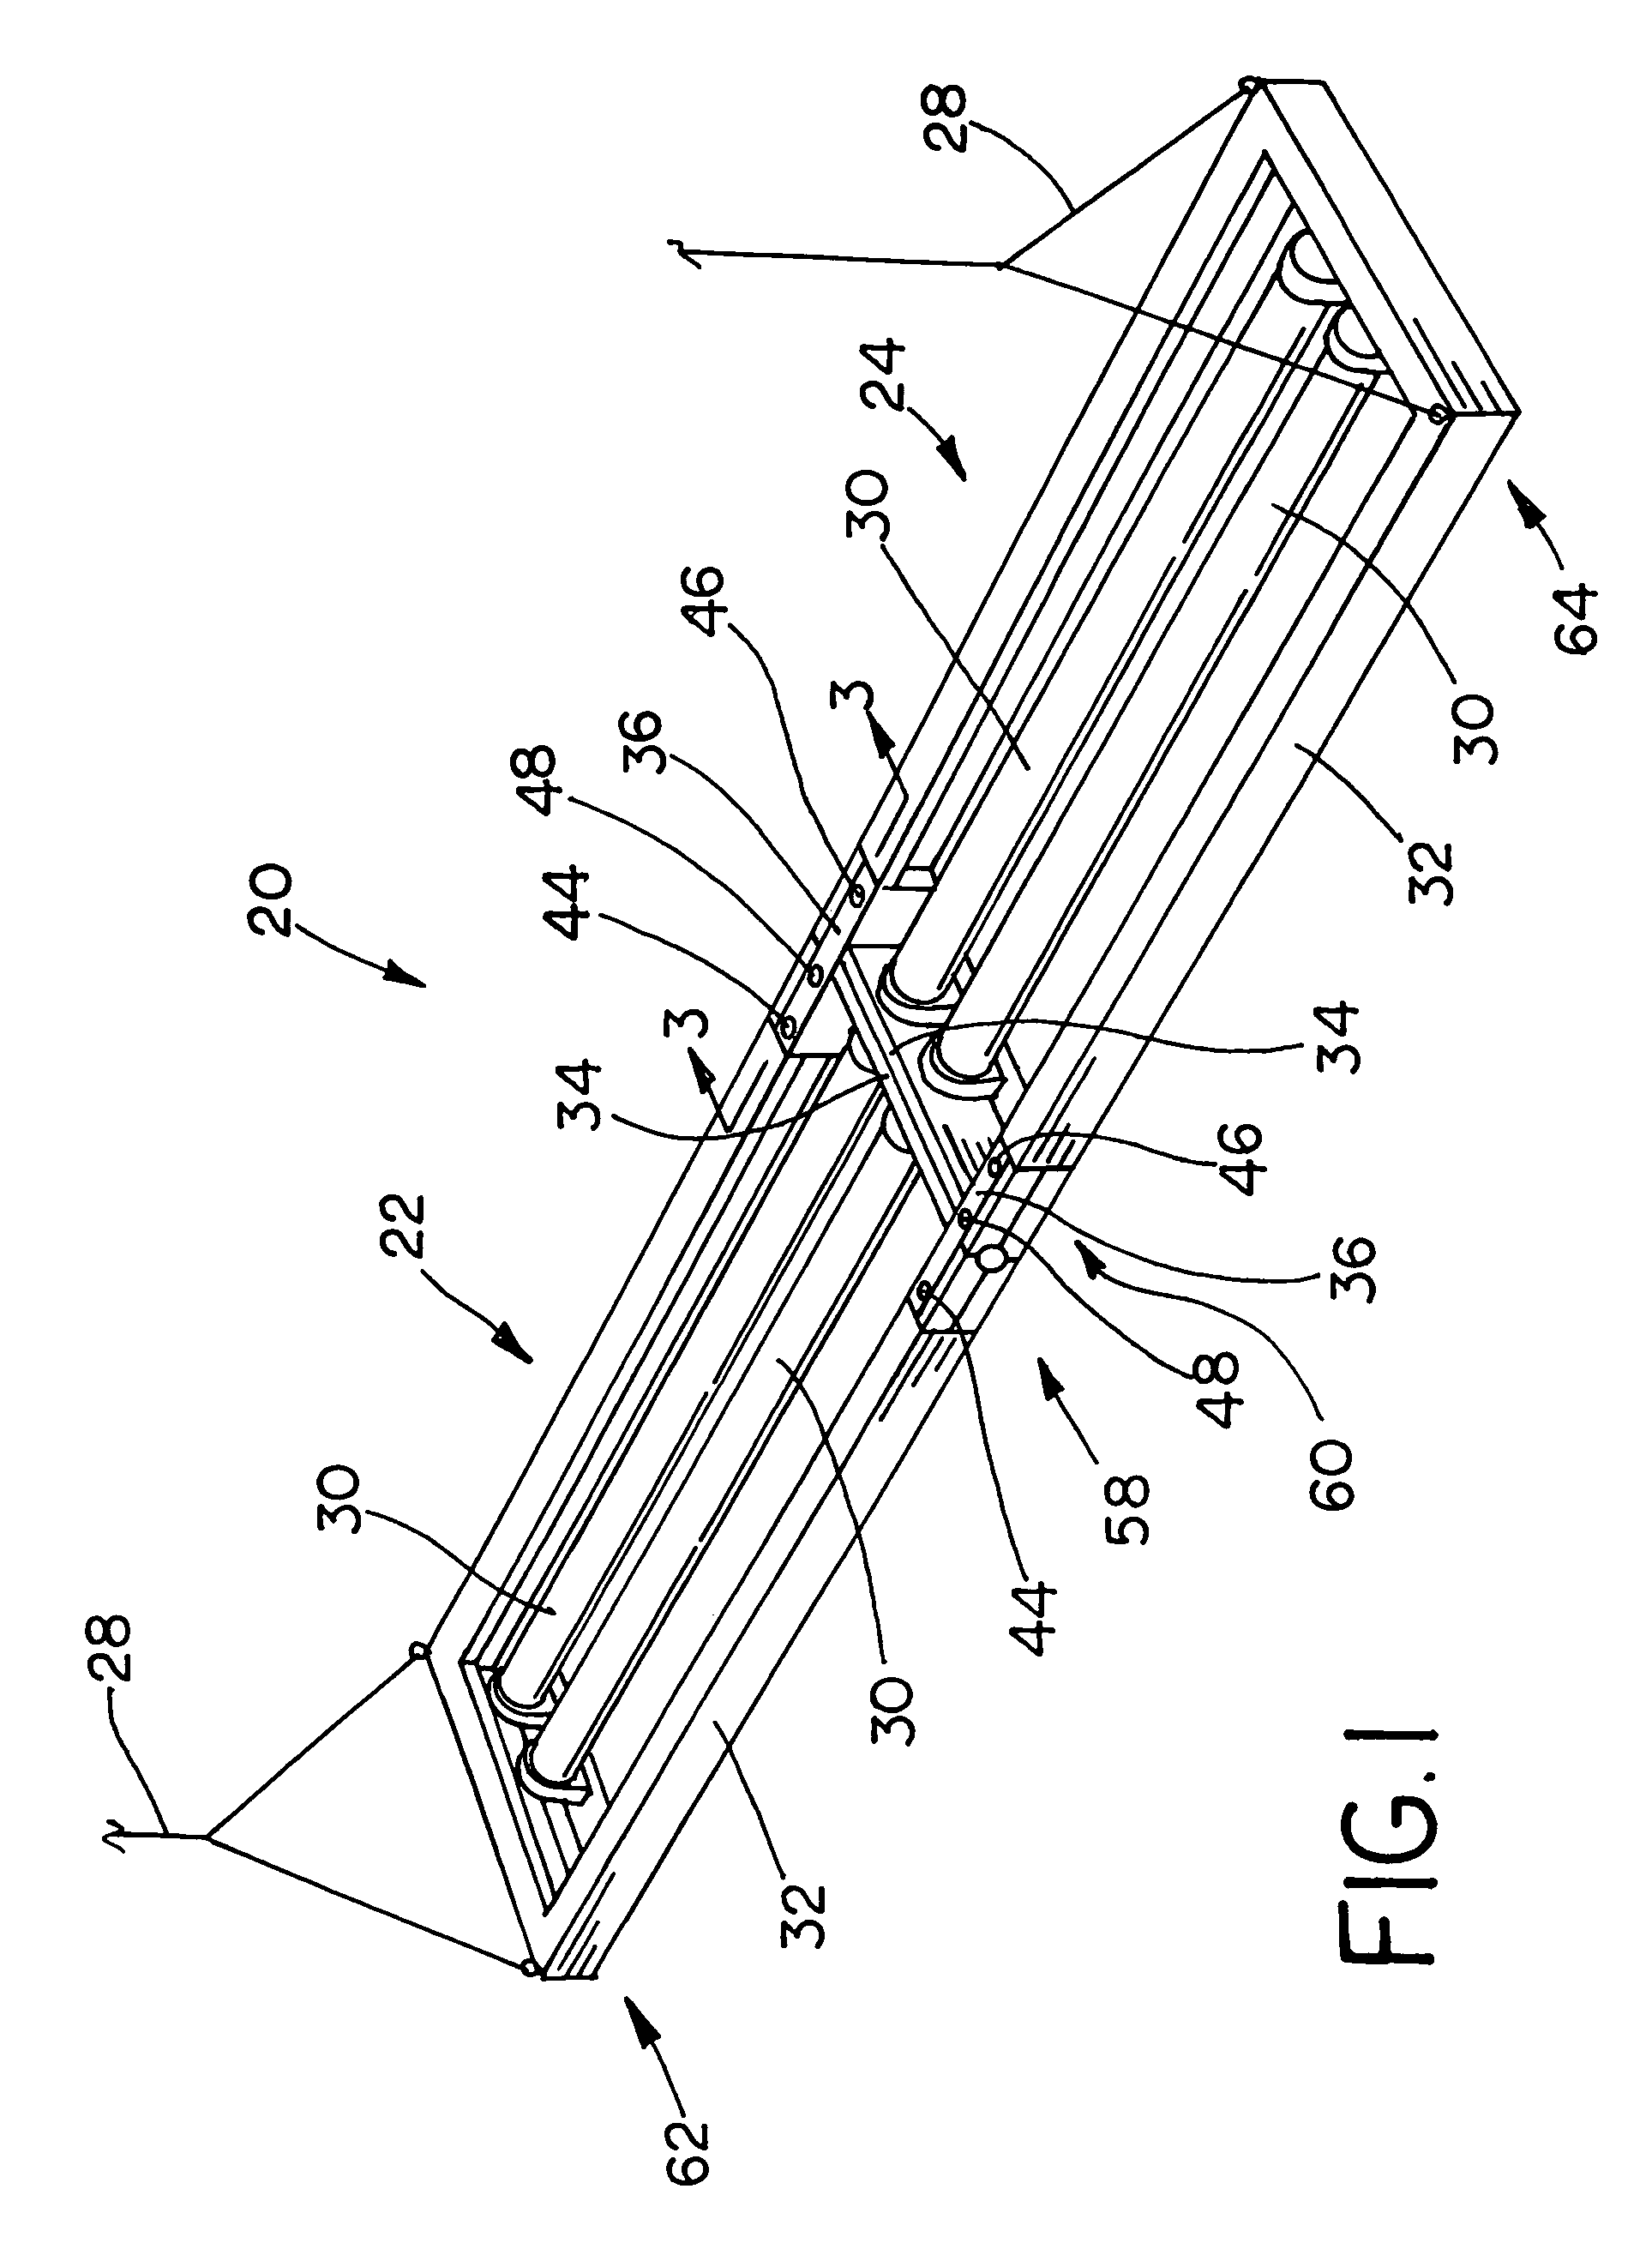 Method and apparatus for joining linear lighting fixtures to eliminate sag